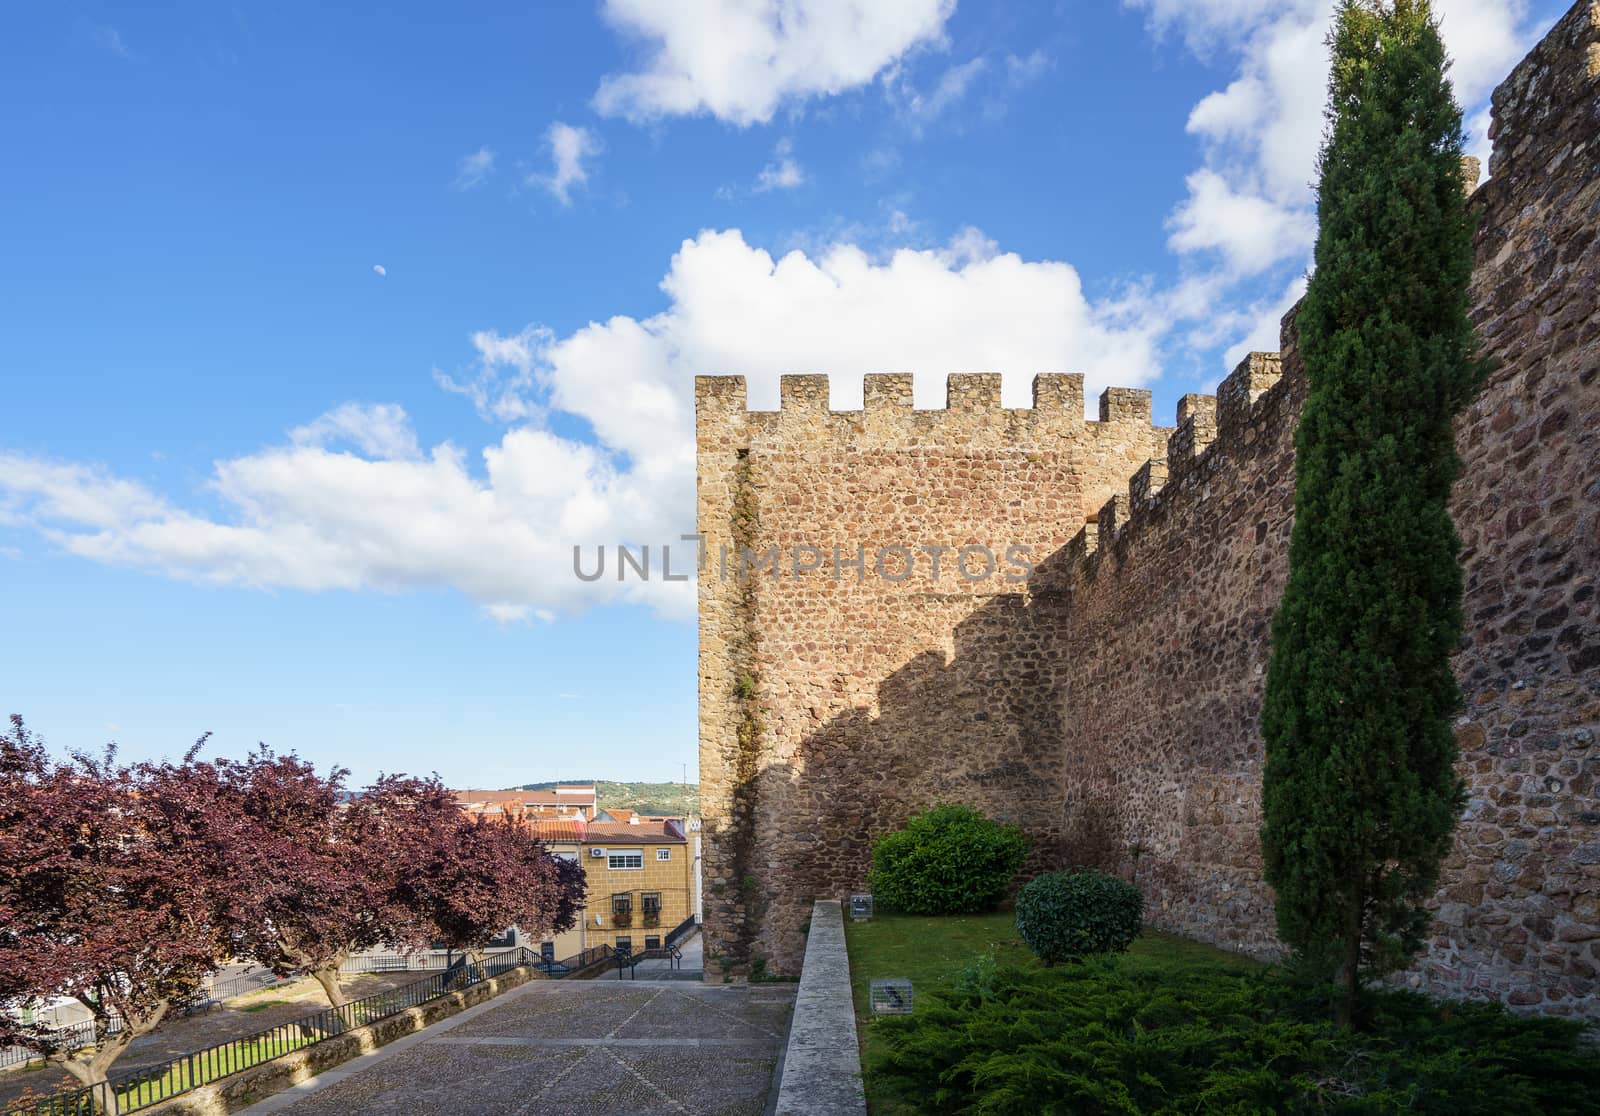 Torre Lucia defensive tower and medieval walls of Plasencia, walled market city in the province of Caceres, Spain